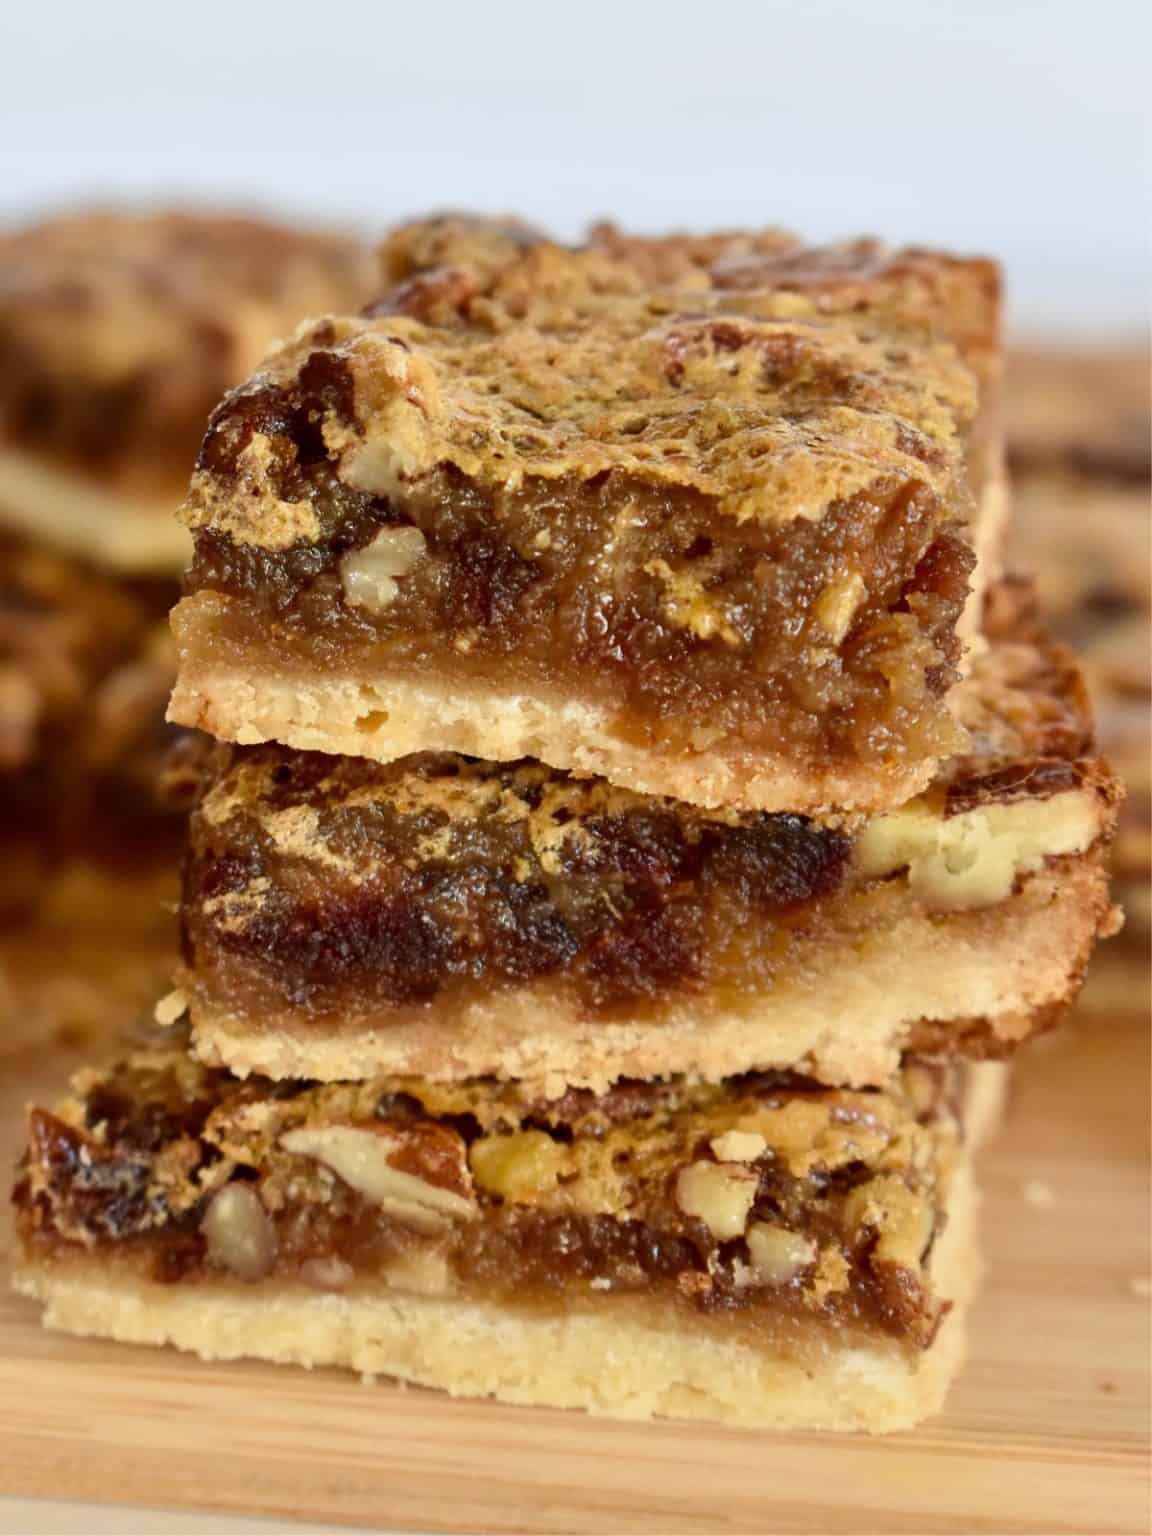 Pecan Pie Date Bars - This Delicious House